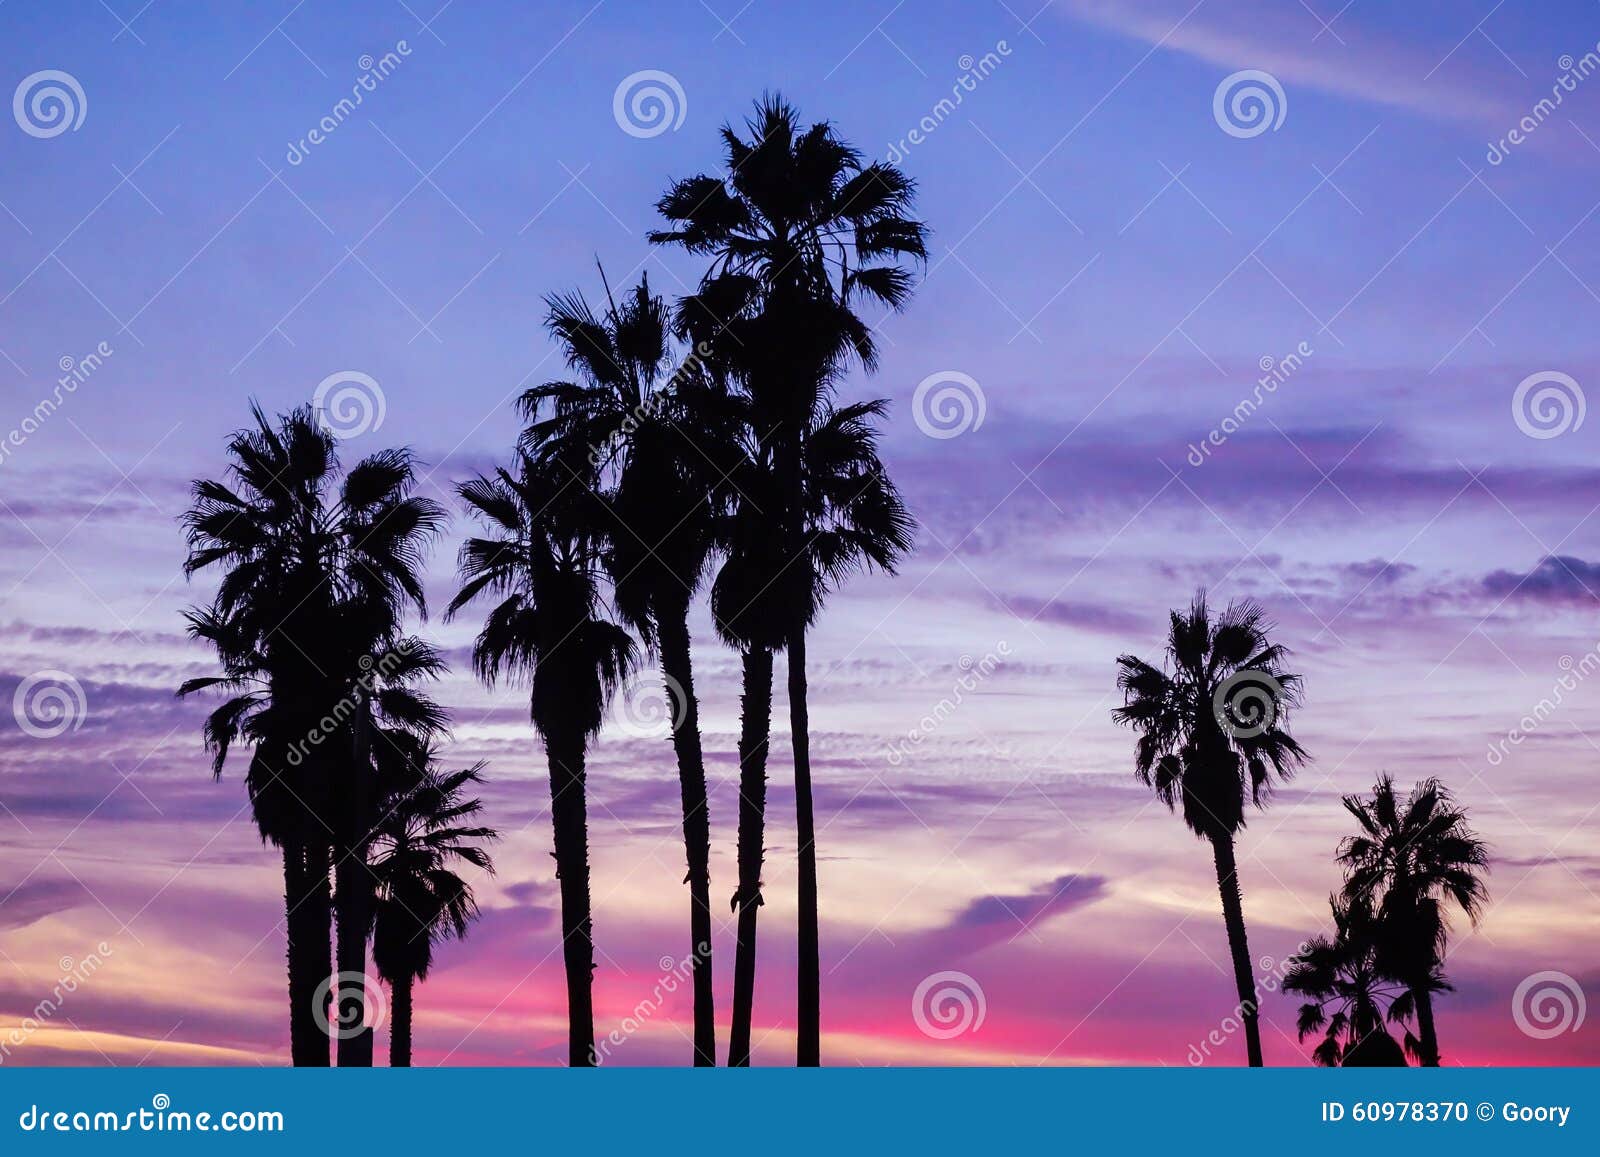 Palm trees and sunset sky stock photo. Image of island - 60978370